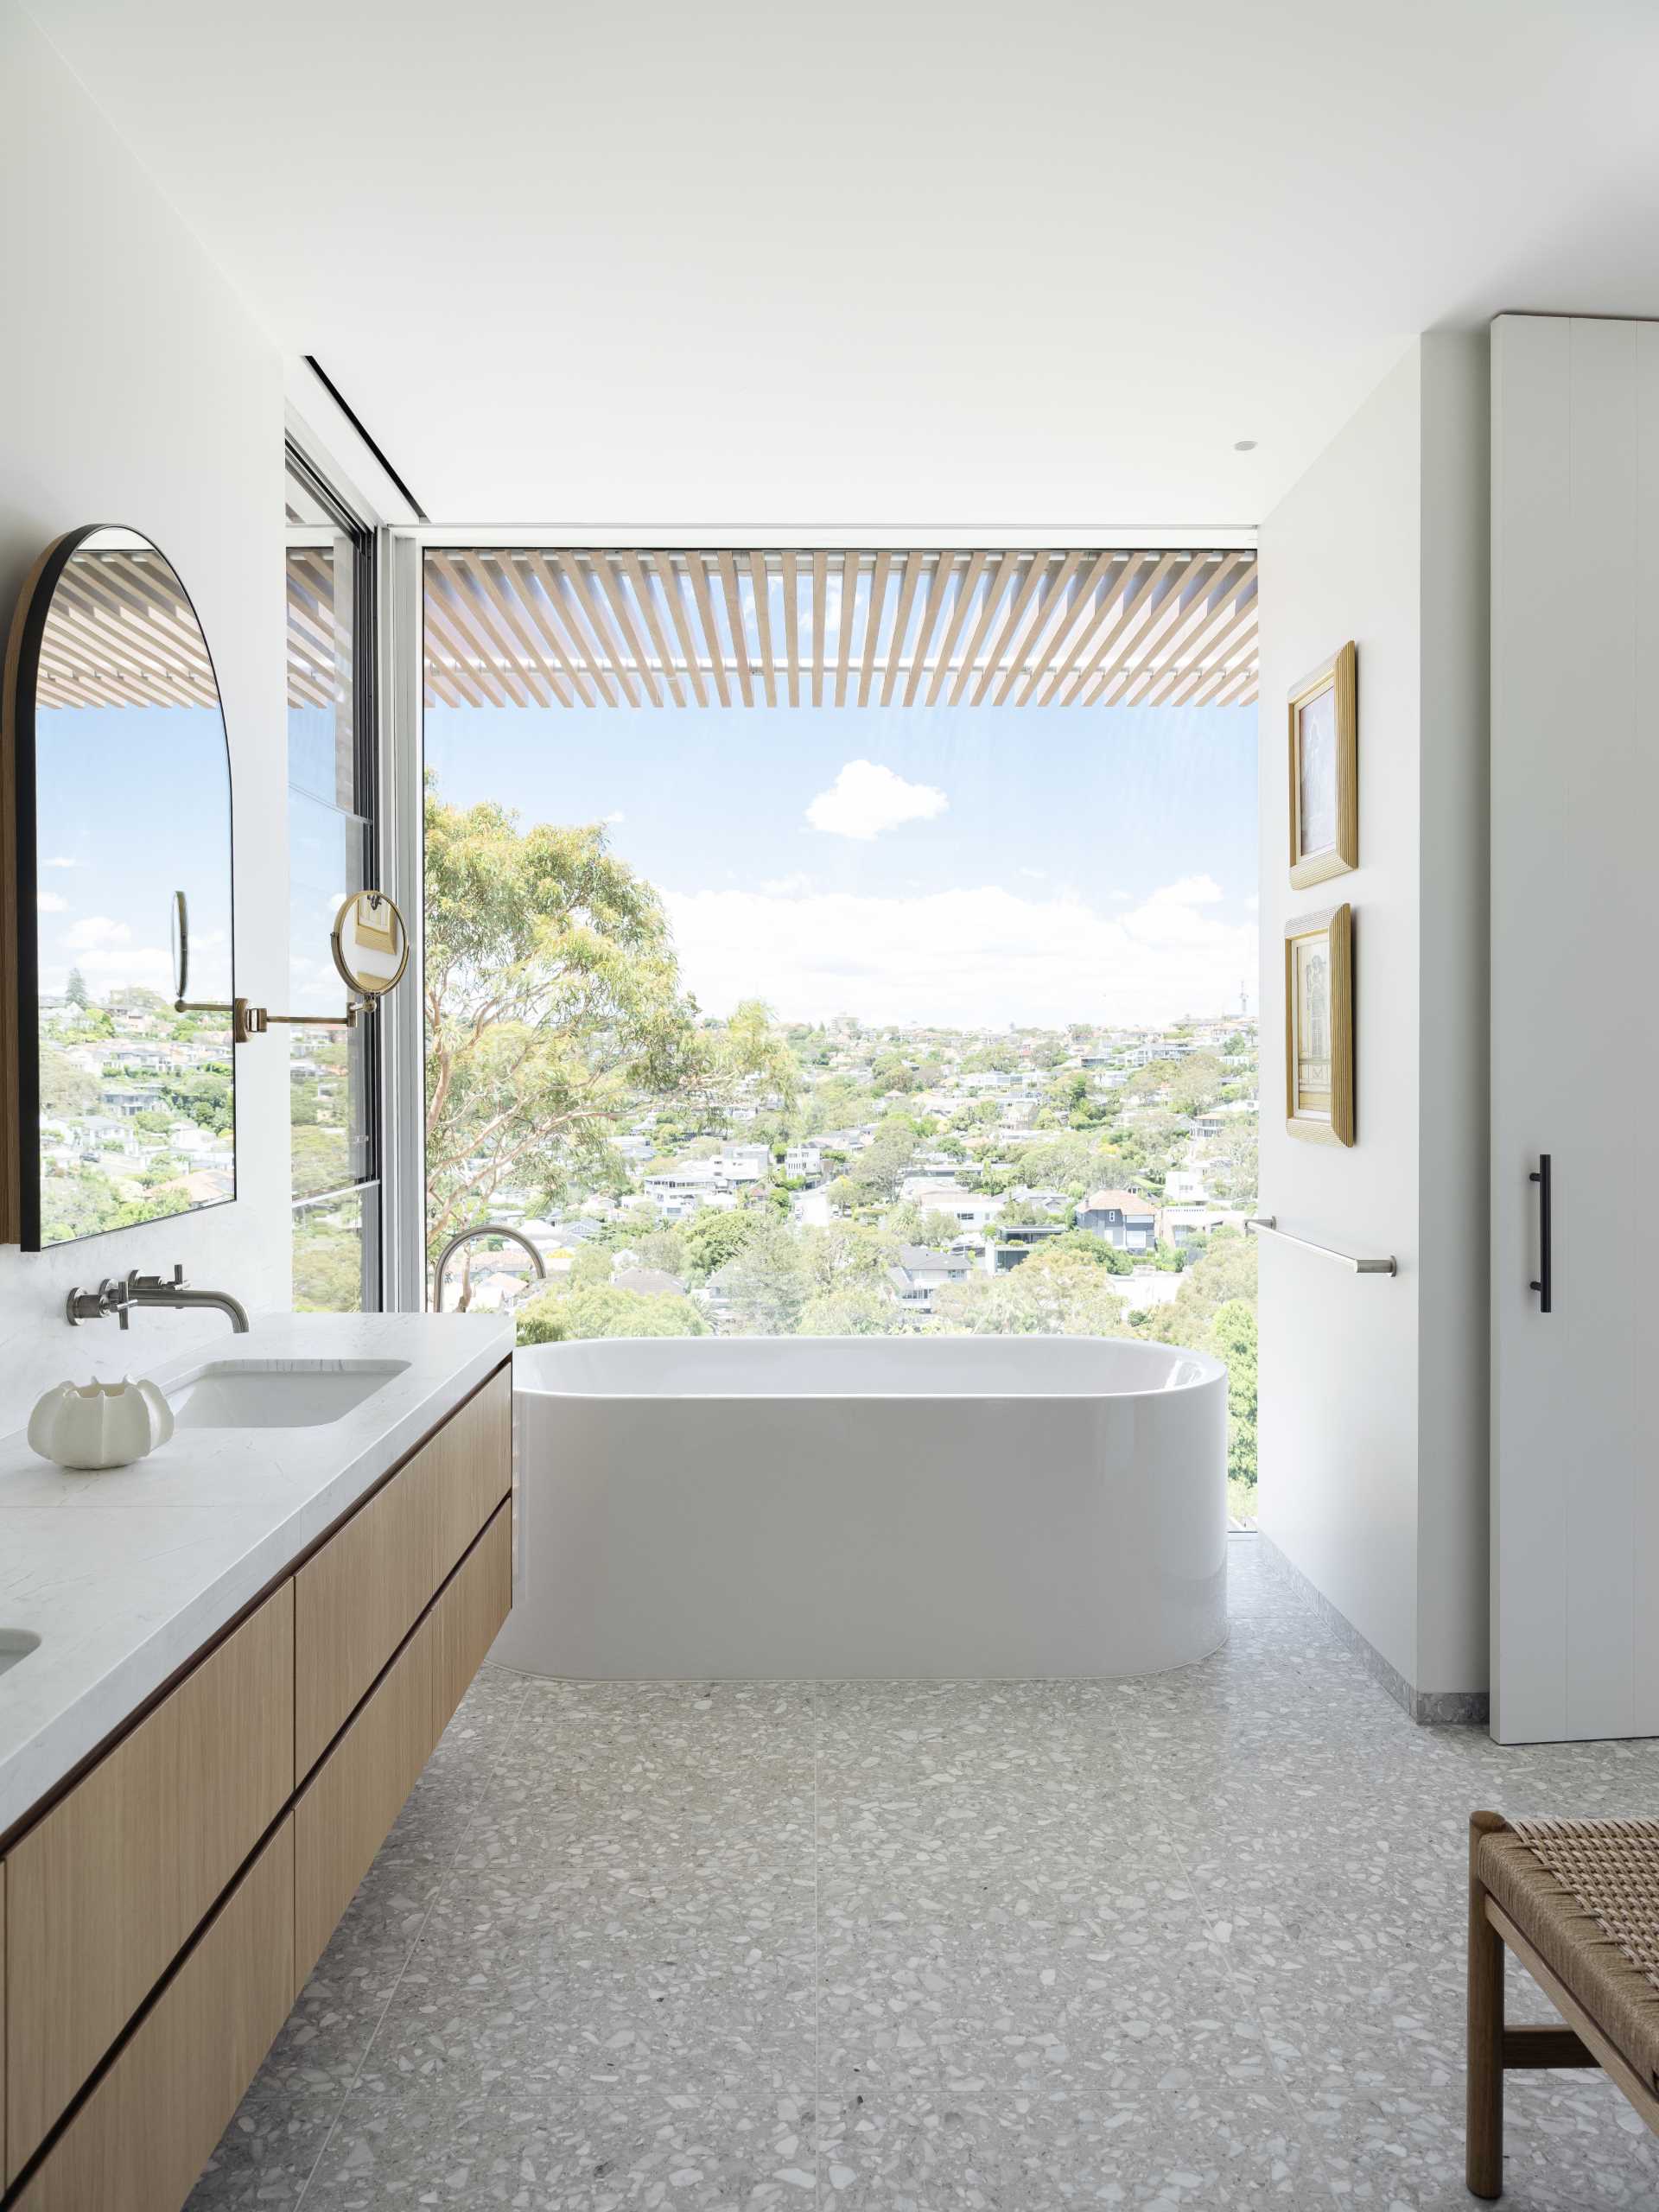 In this bathroom, a large picture window provides a backdrop for the freestanding bathtub, and arched mirrors are hung on the wall above the double vanity. 